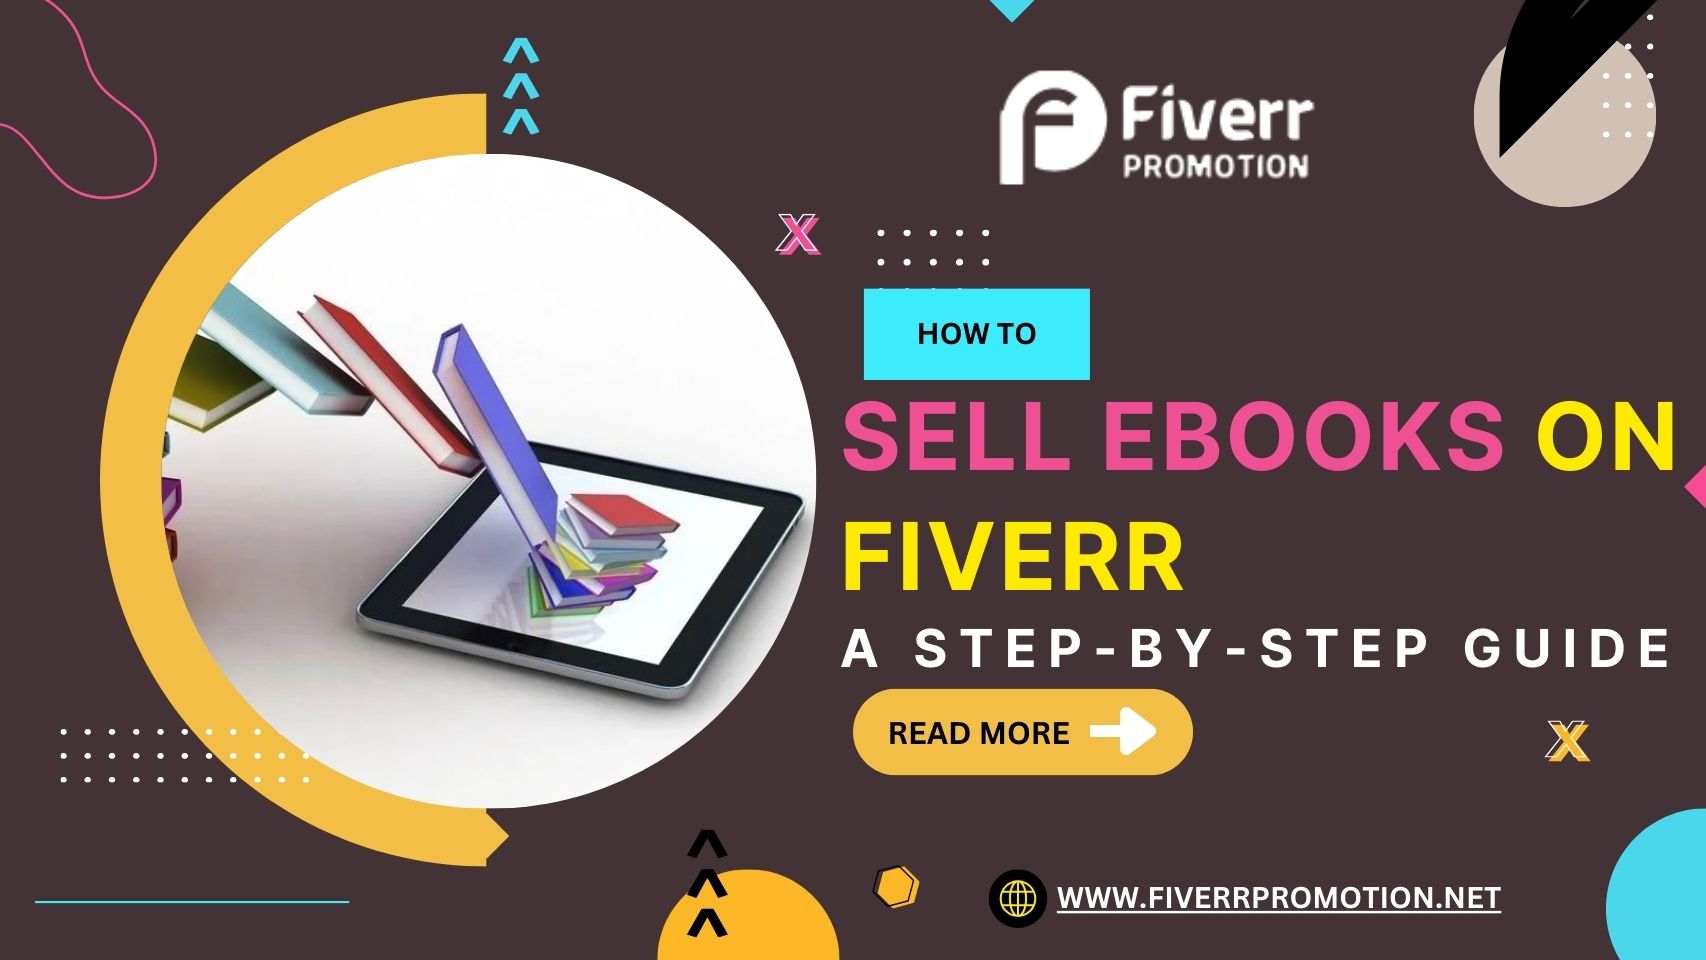 How to Sell Ebooks on Fiverr: A Step-by-Step Guide